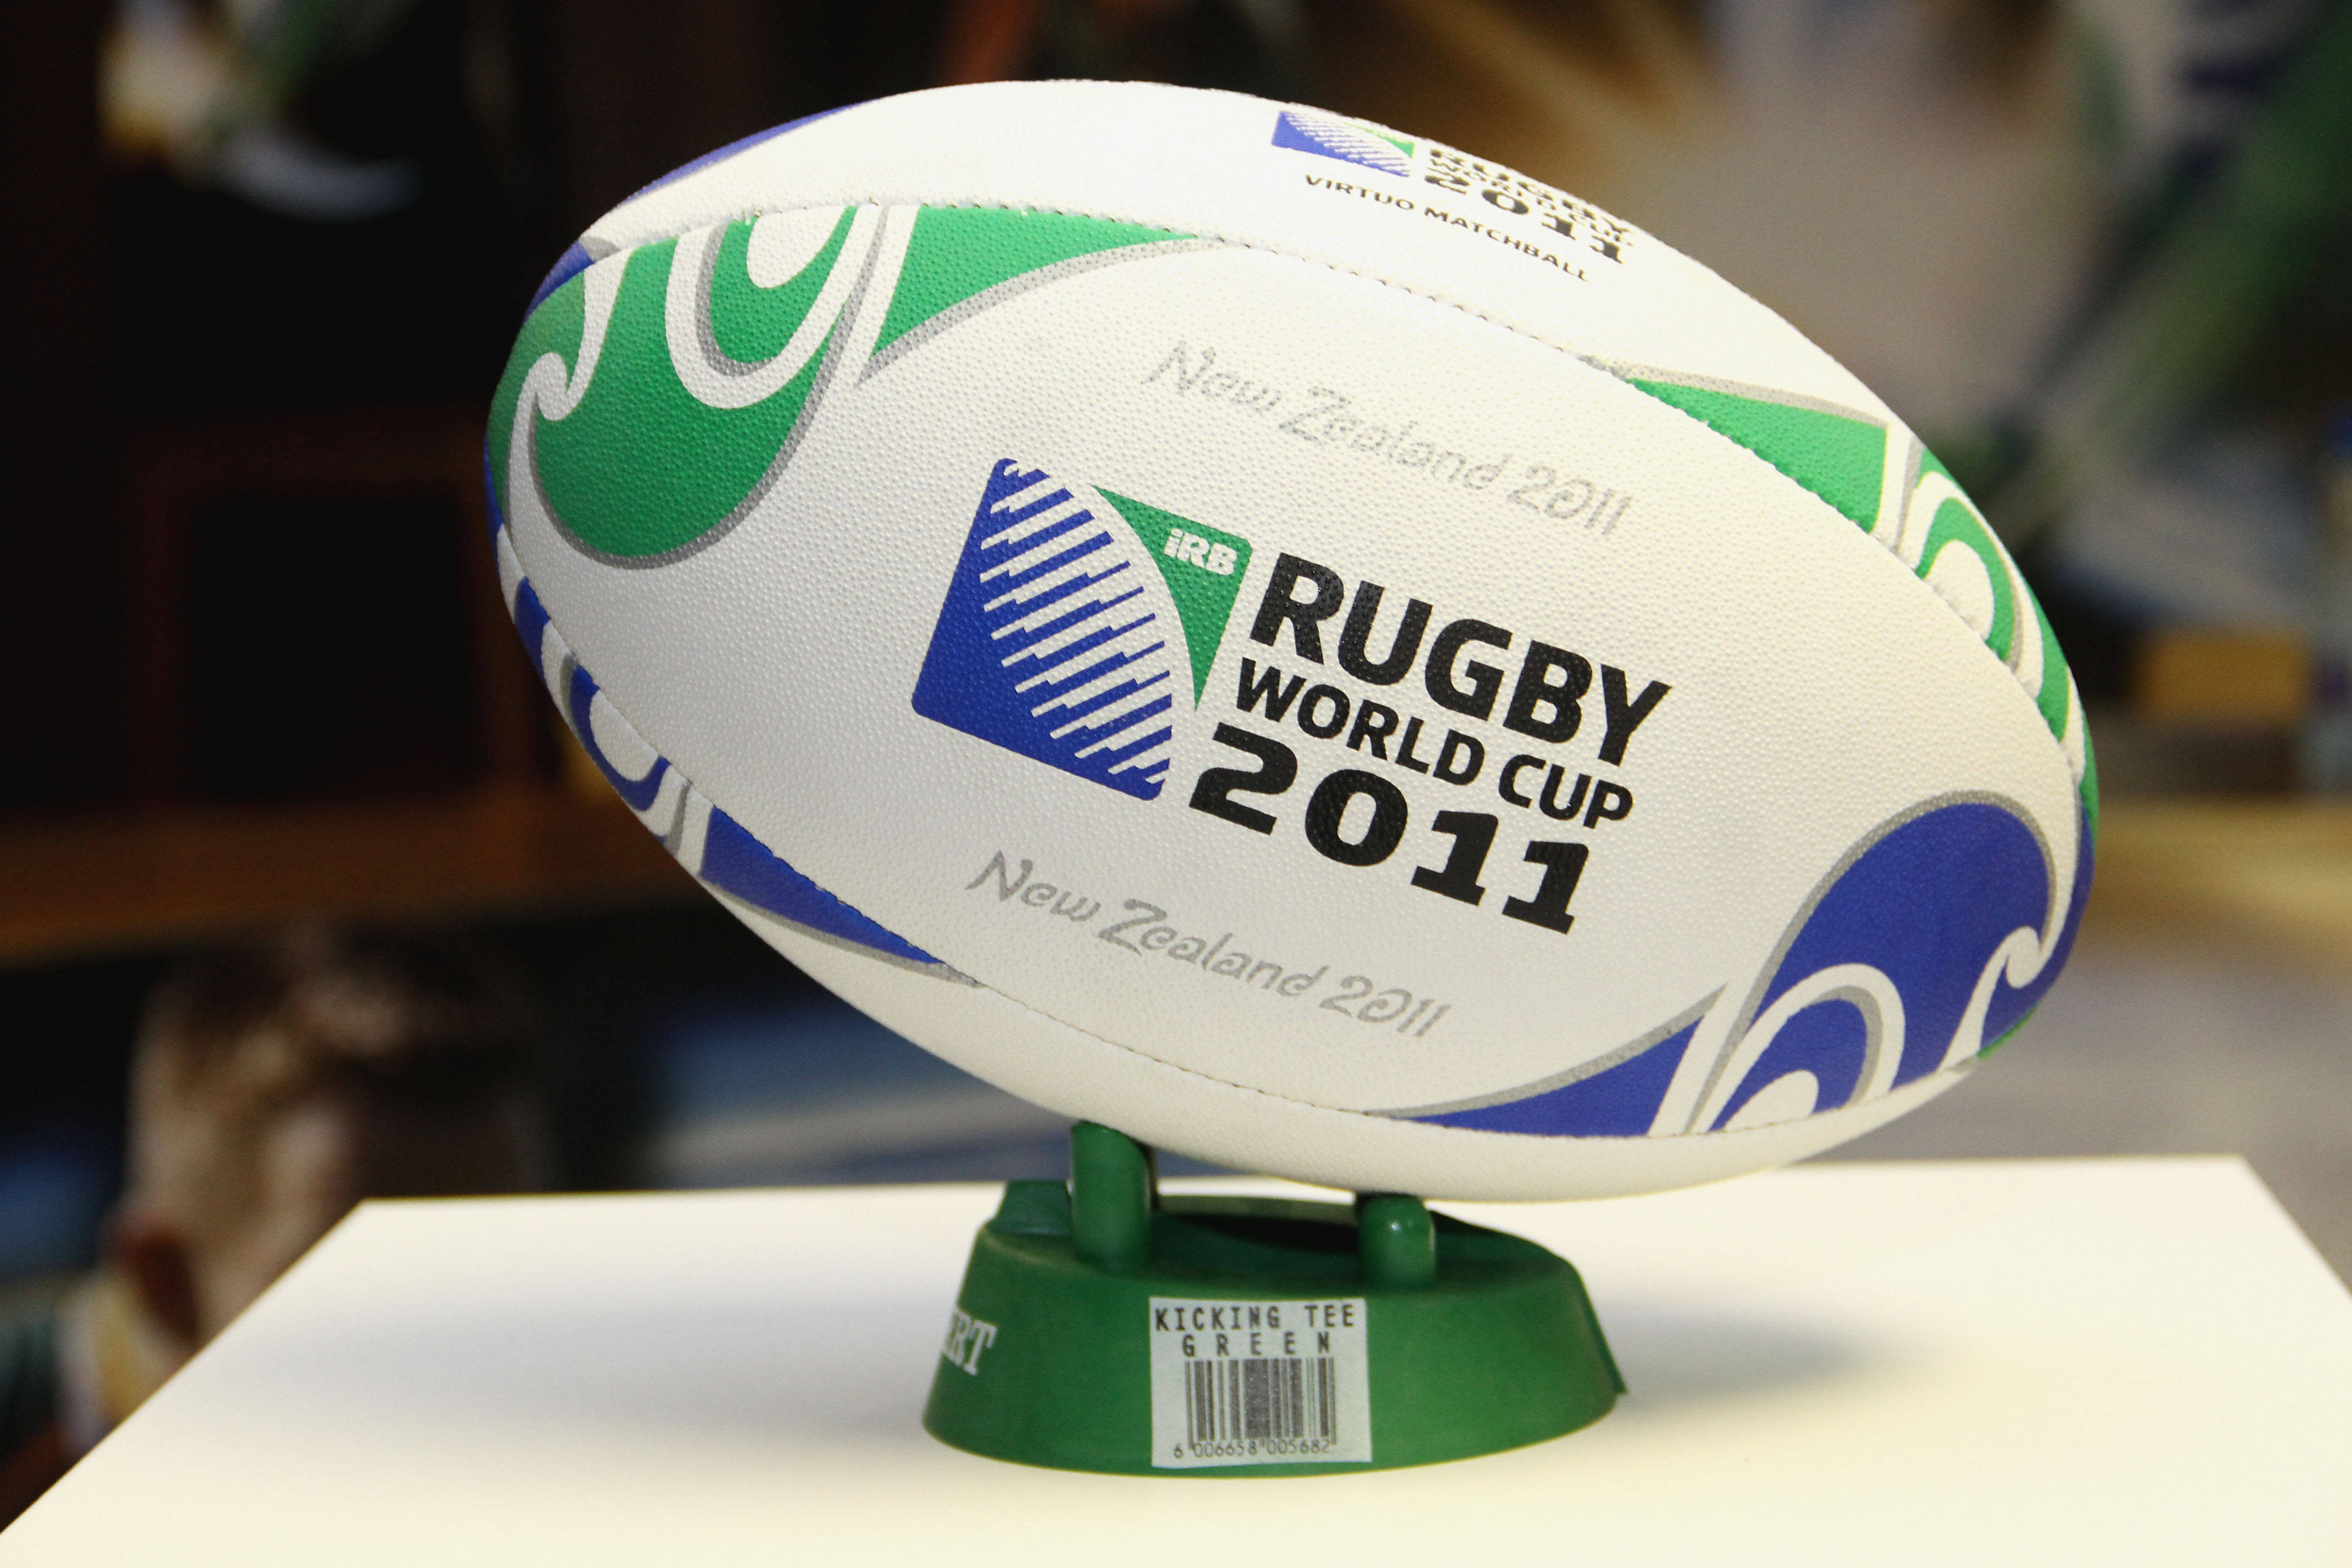 Sports Image, Rugby Image, And Hd Wallpaper Of Rugby - Rugby World Cup 2023 Ball , HD Wallpaper & Backgrounds